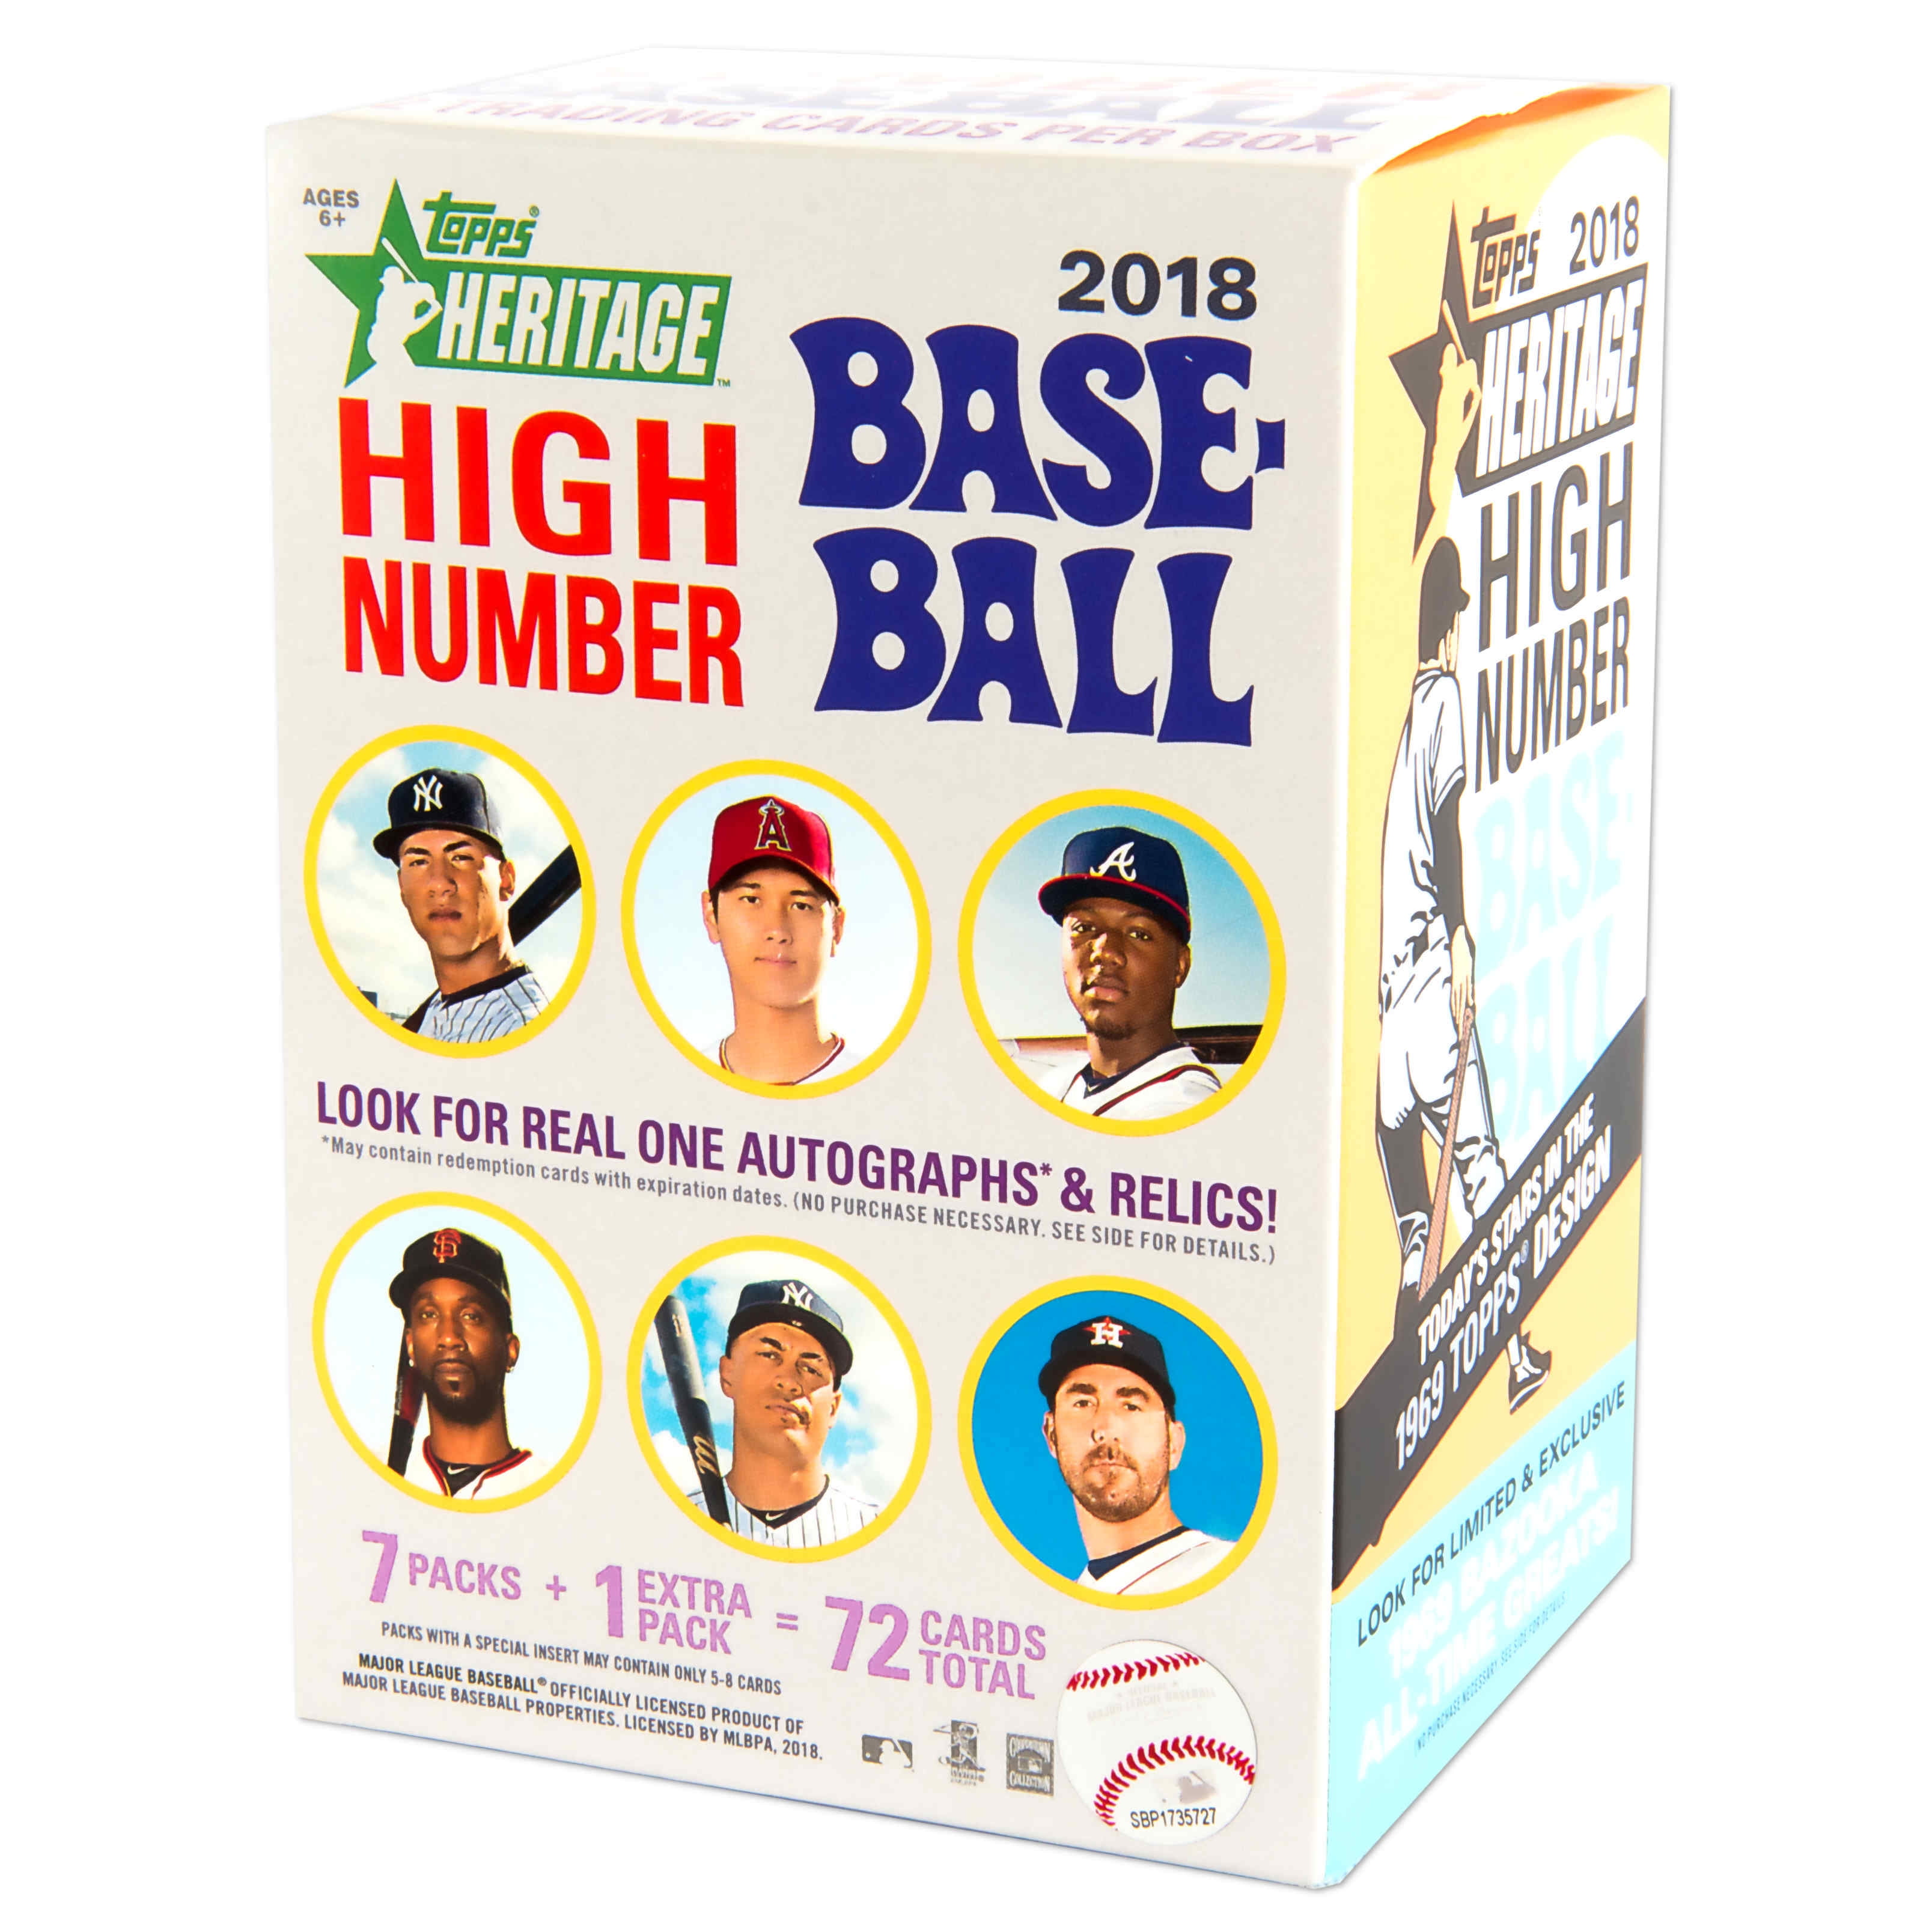 2018 Topps Heritage High Number Baseball Value Box Trading Cards